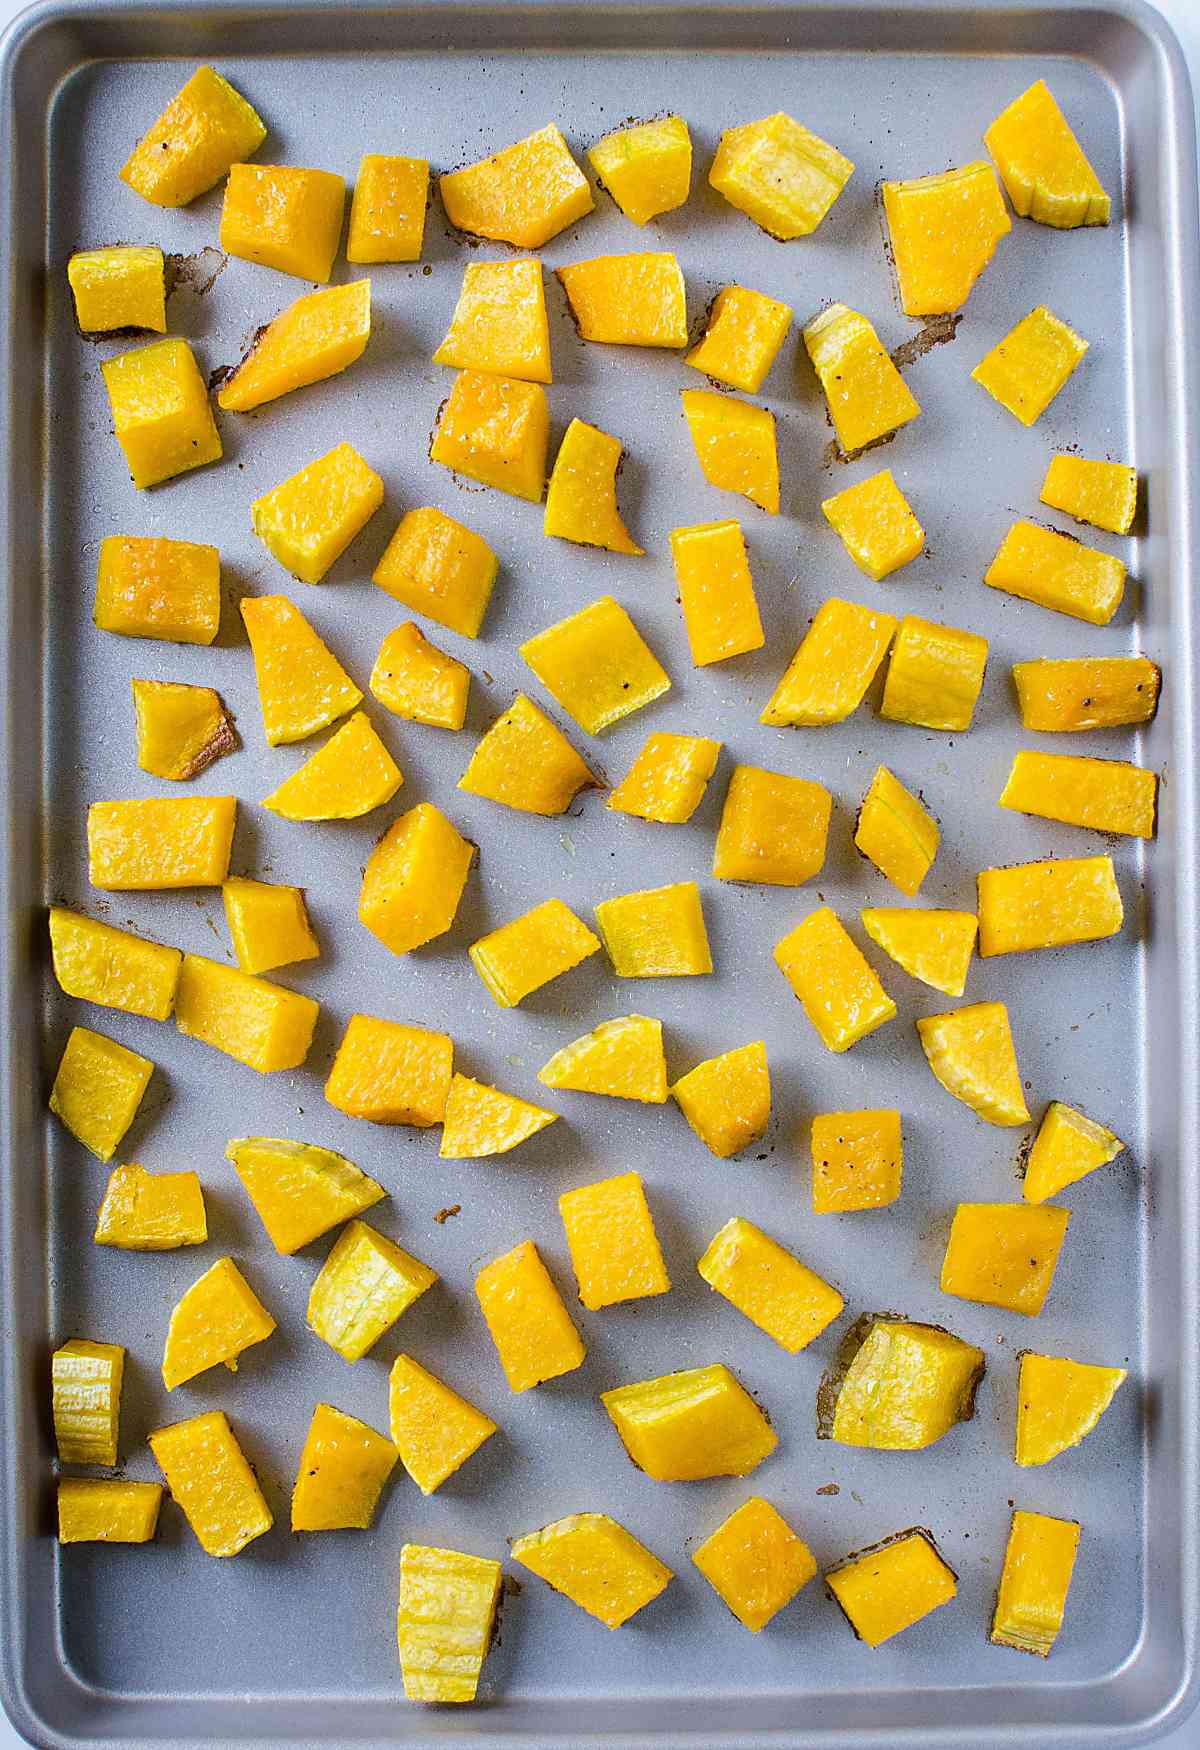 butternut squash pieces in a baking sheet after baking is over.